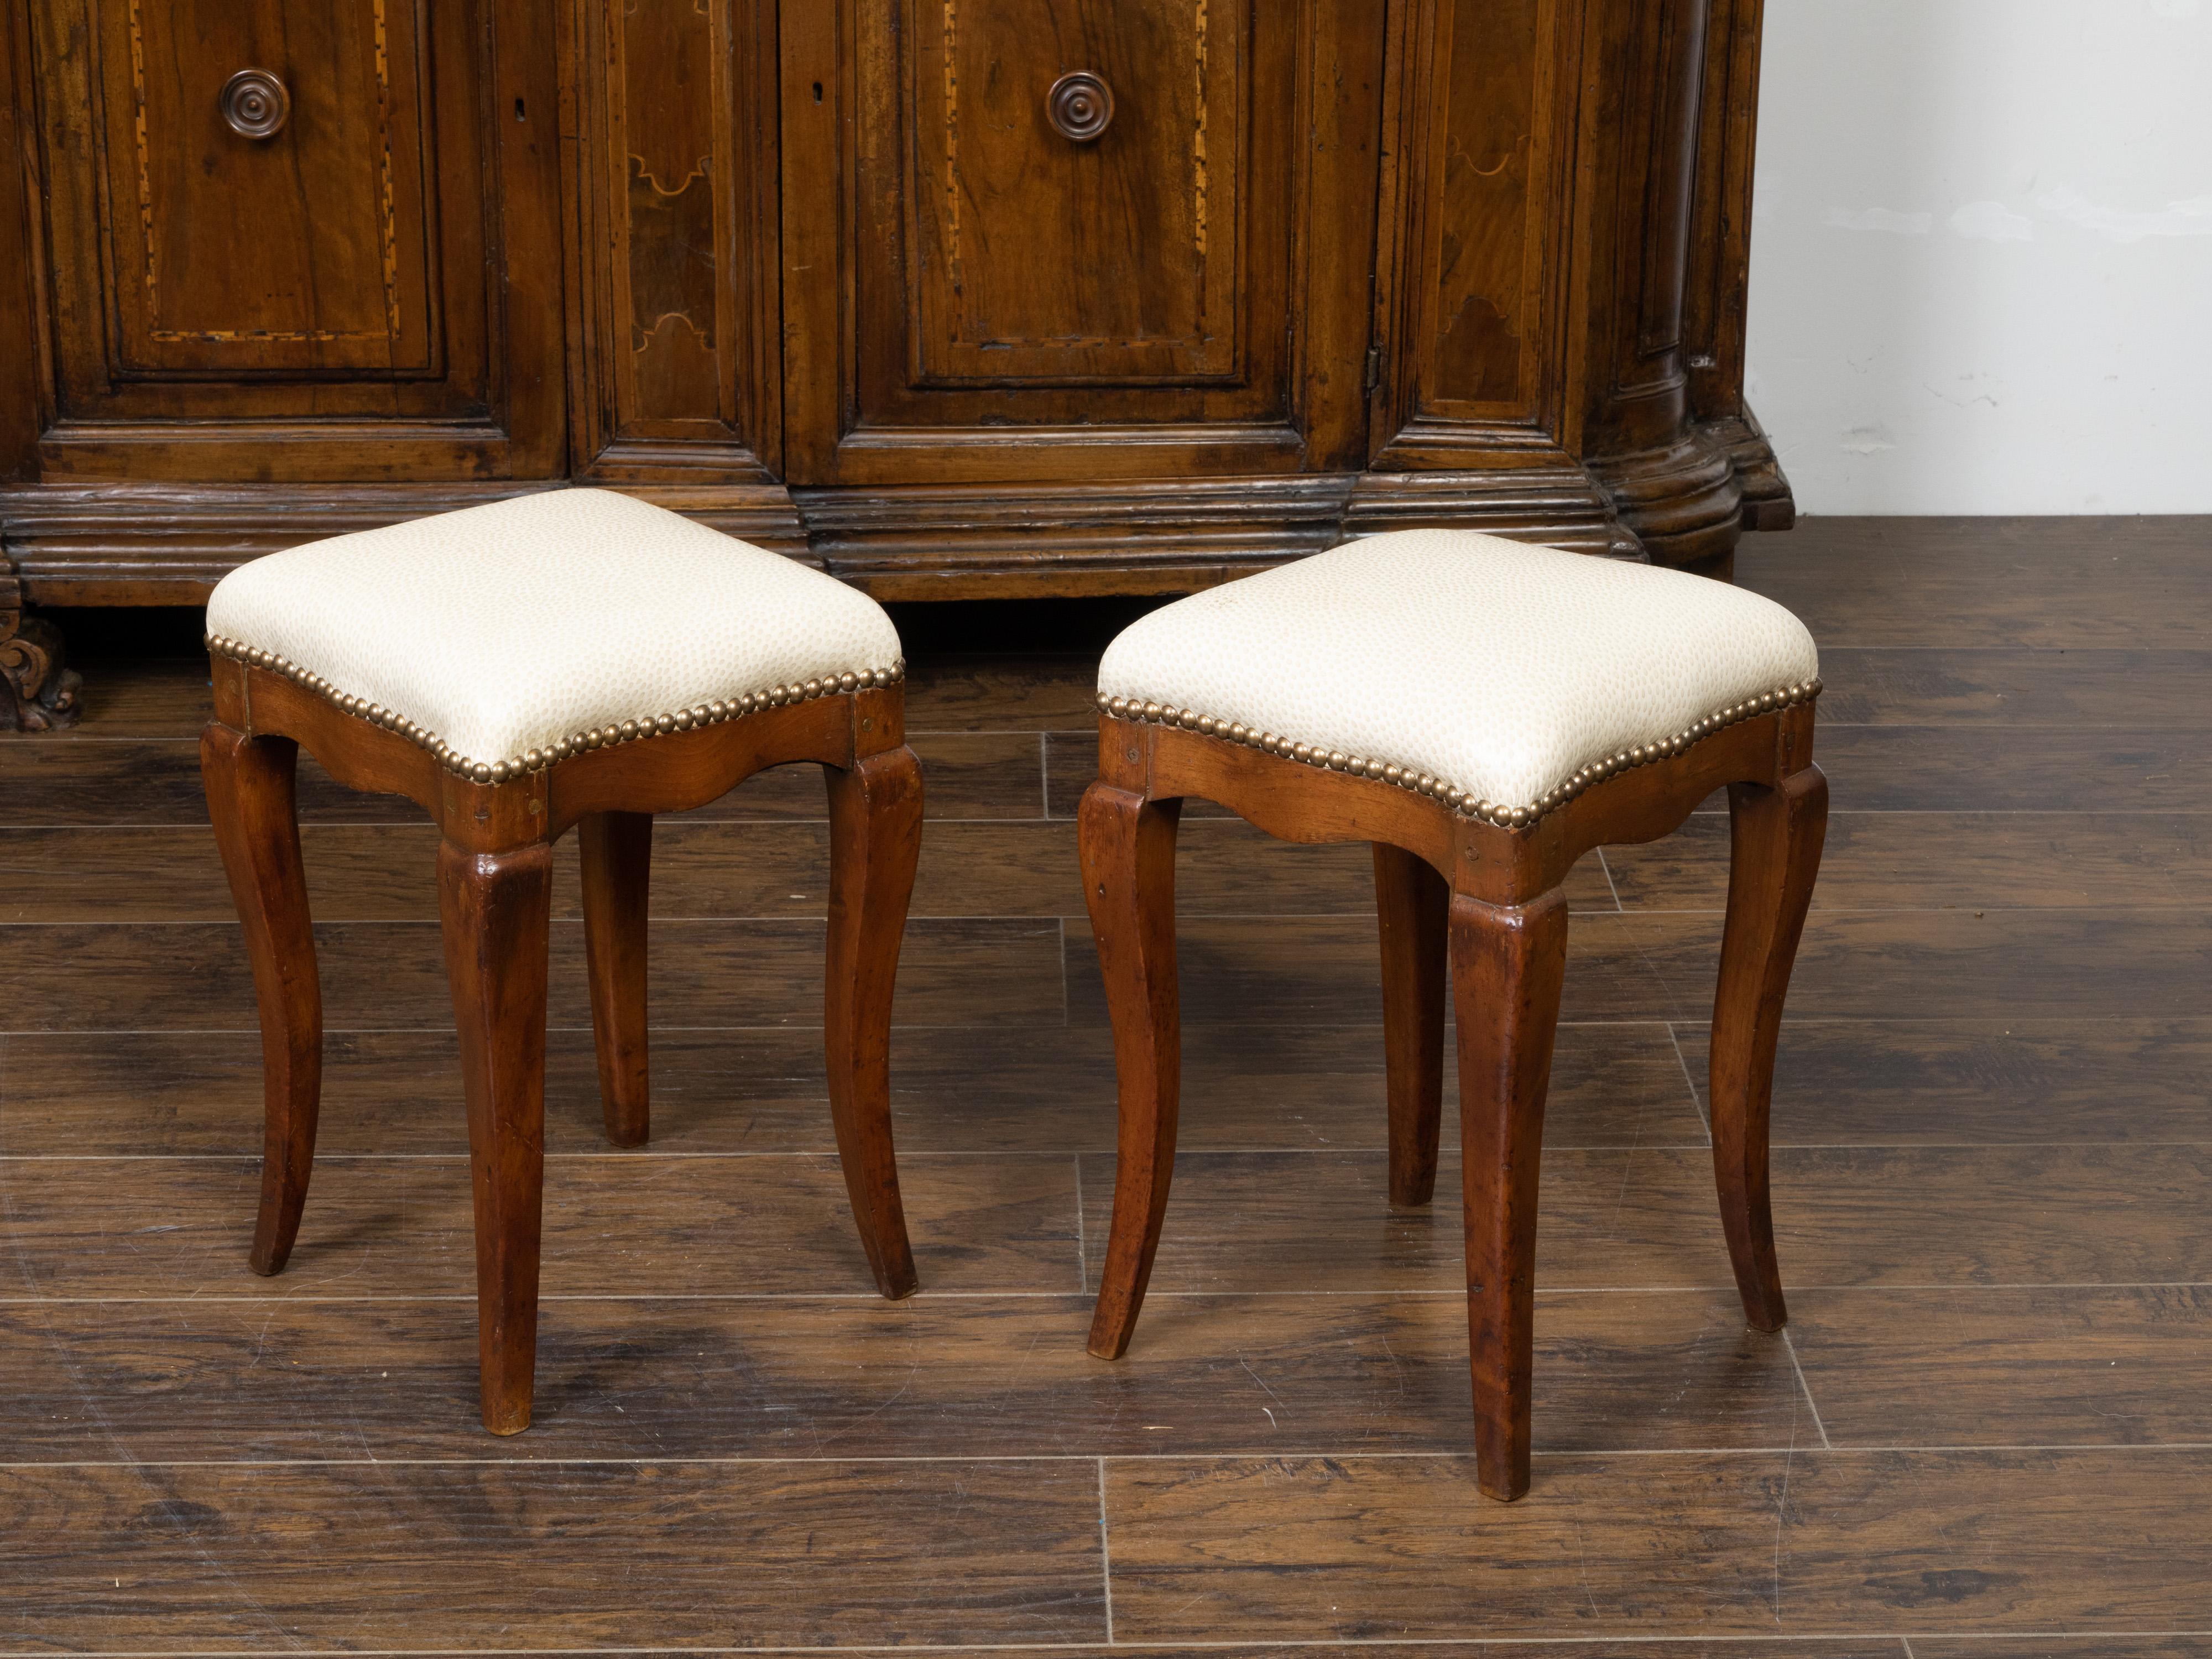 Pair of 19th Century Italian Walnut Stools with Cabriole Legs and New Upholstery For Sale 1